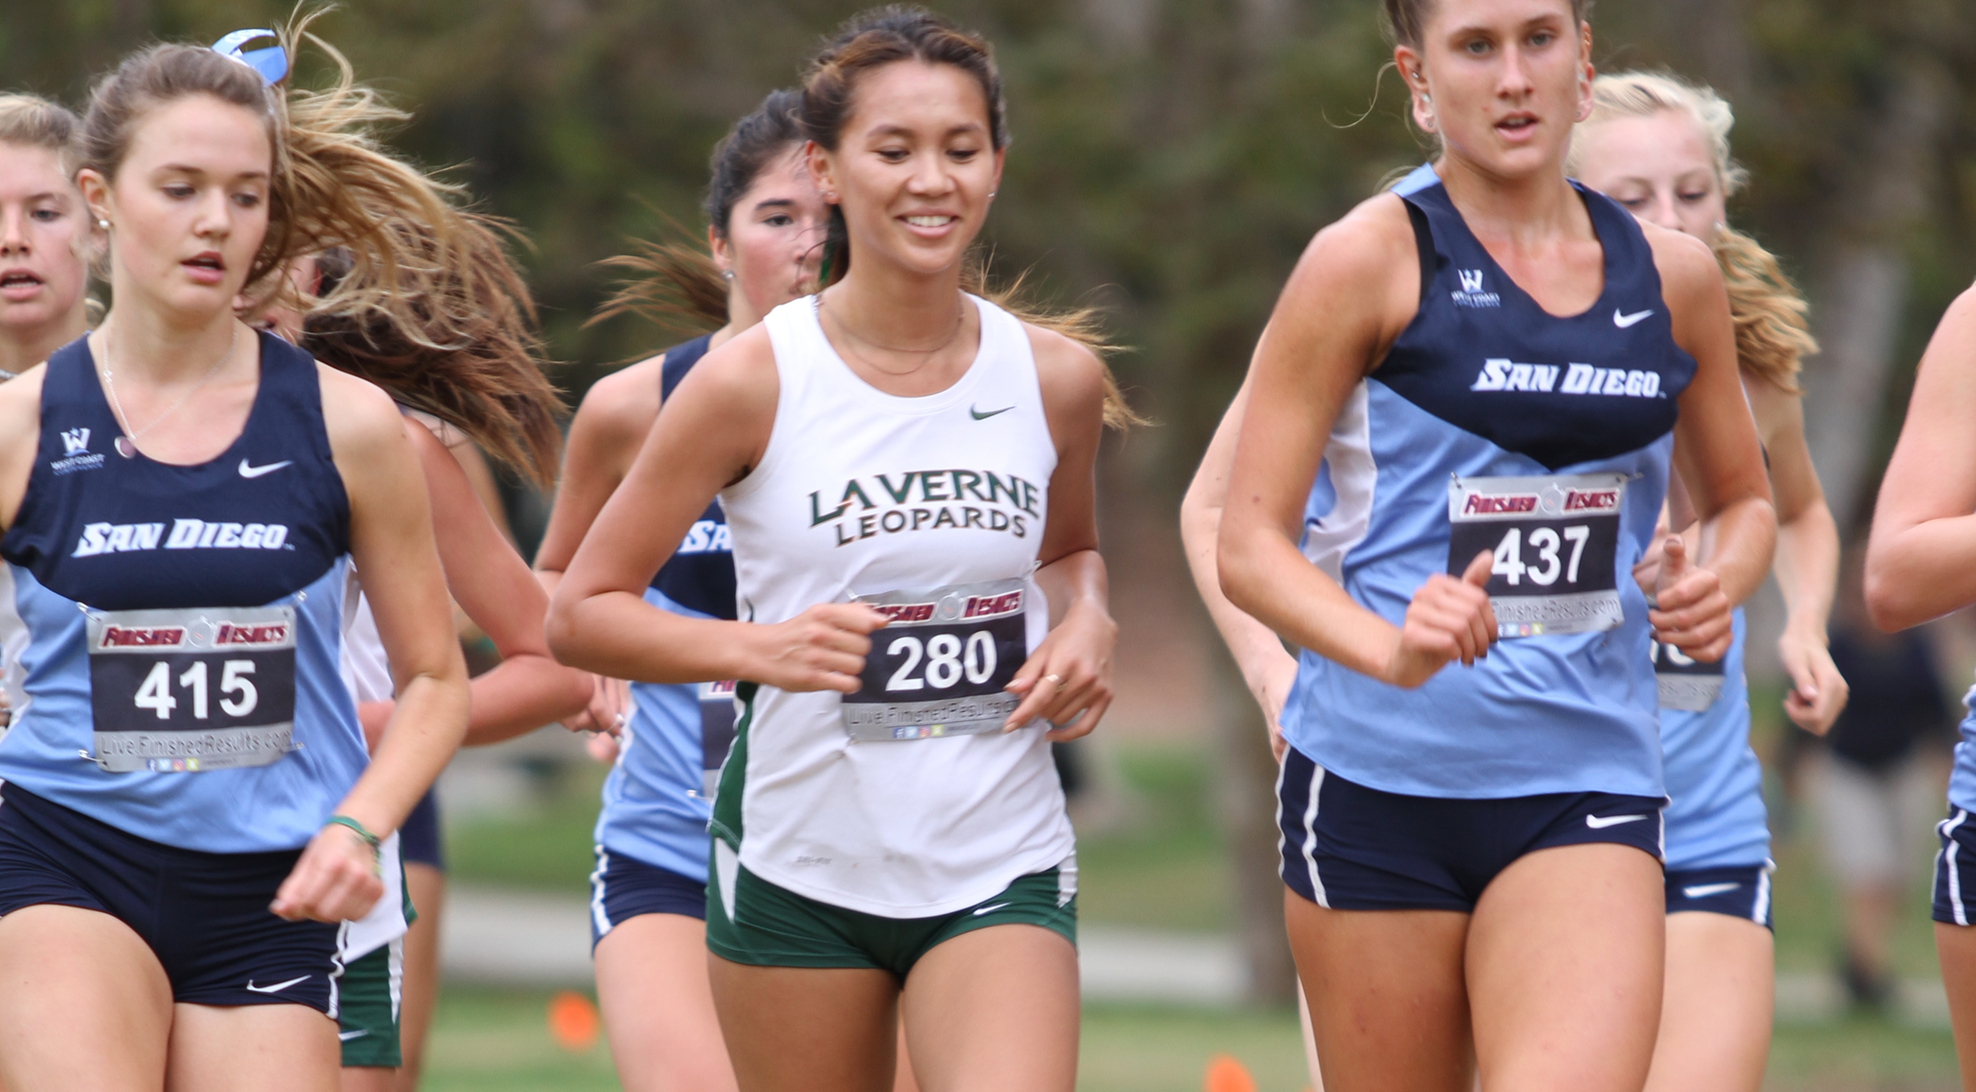 Cerrillos finishes 26th, earns All-West Region honors